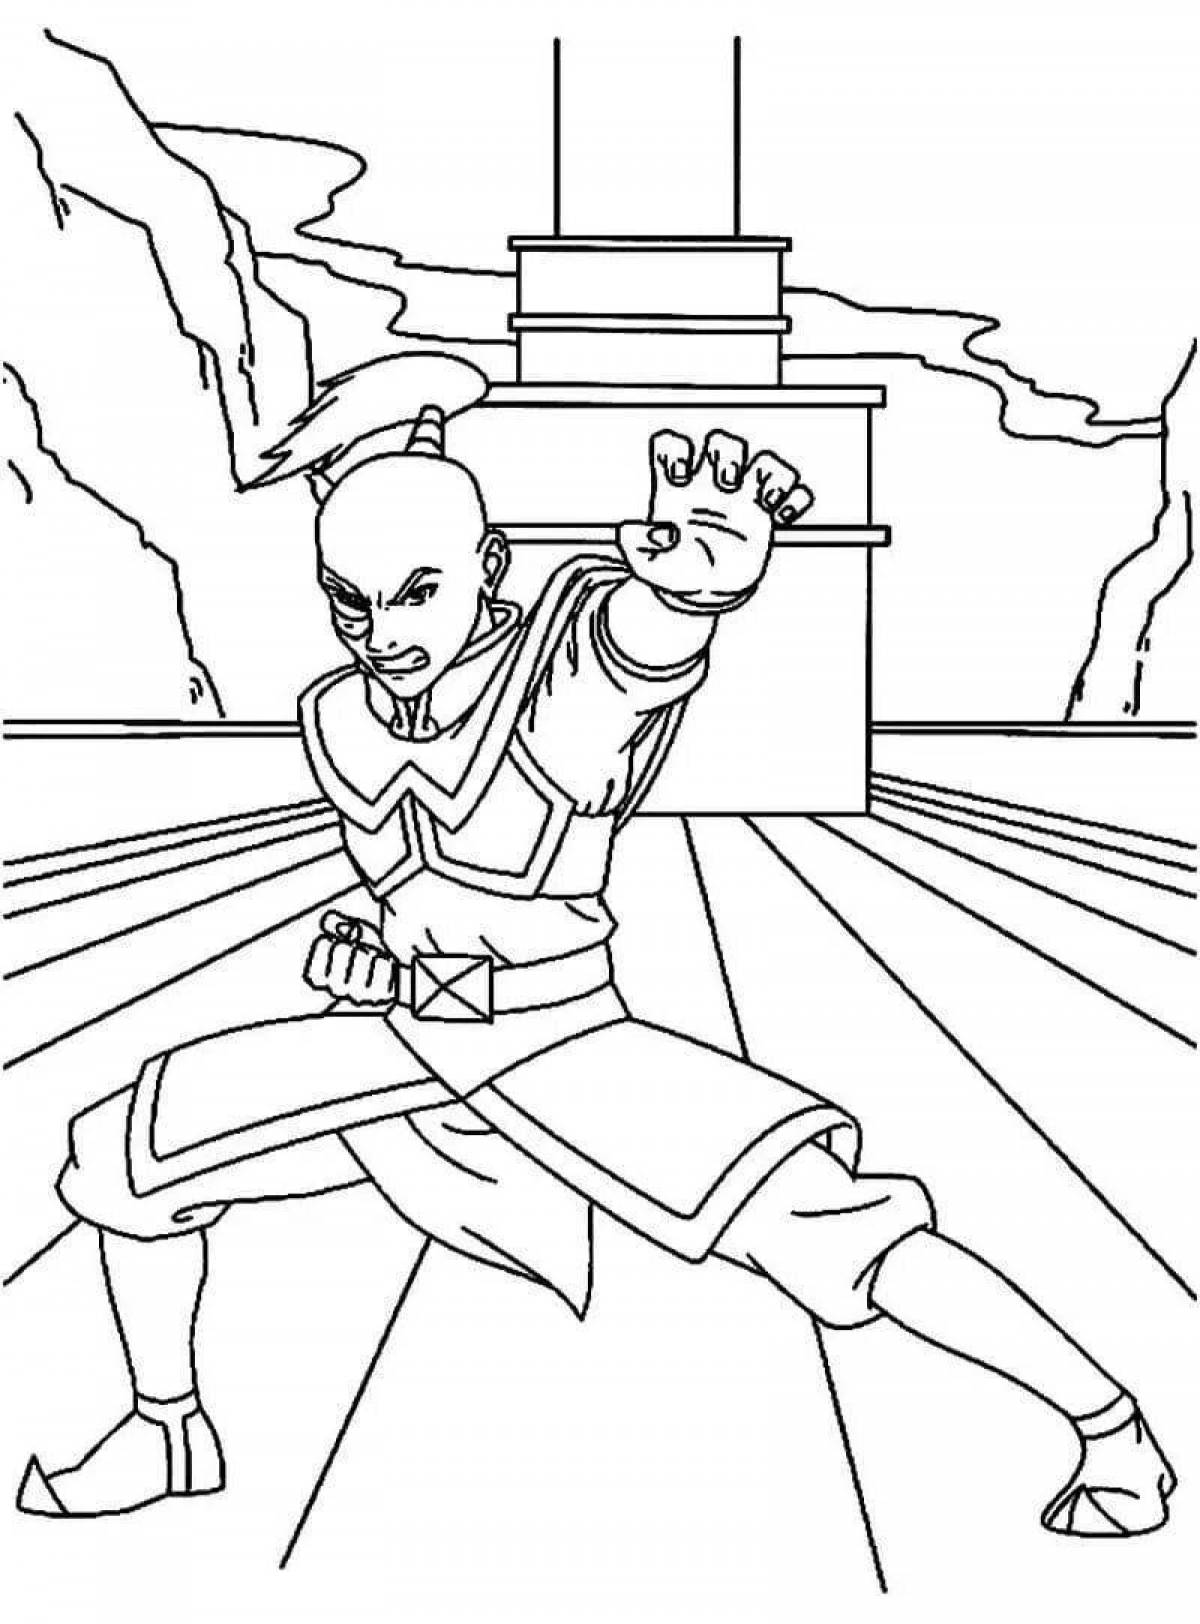 Fascinating Avatar: The Last Airbender Coloring Page